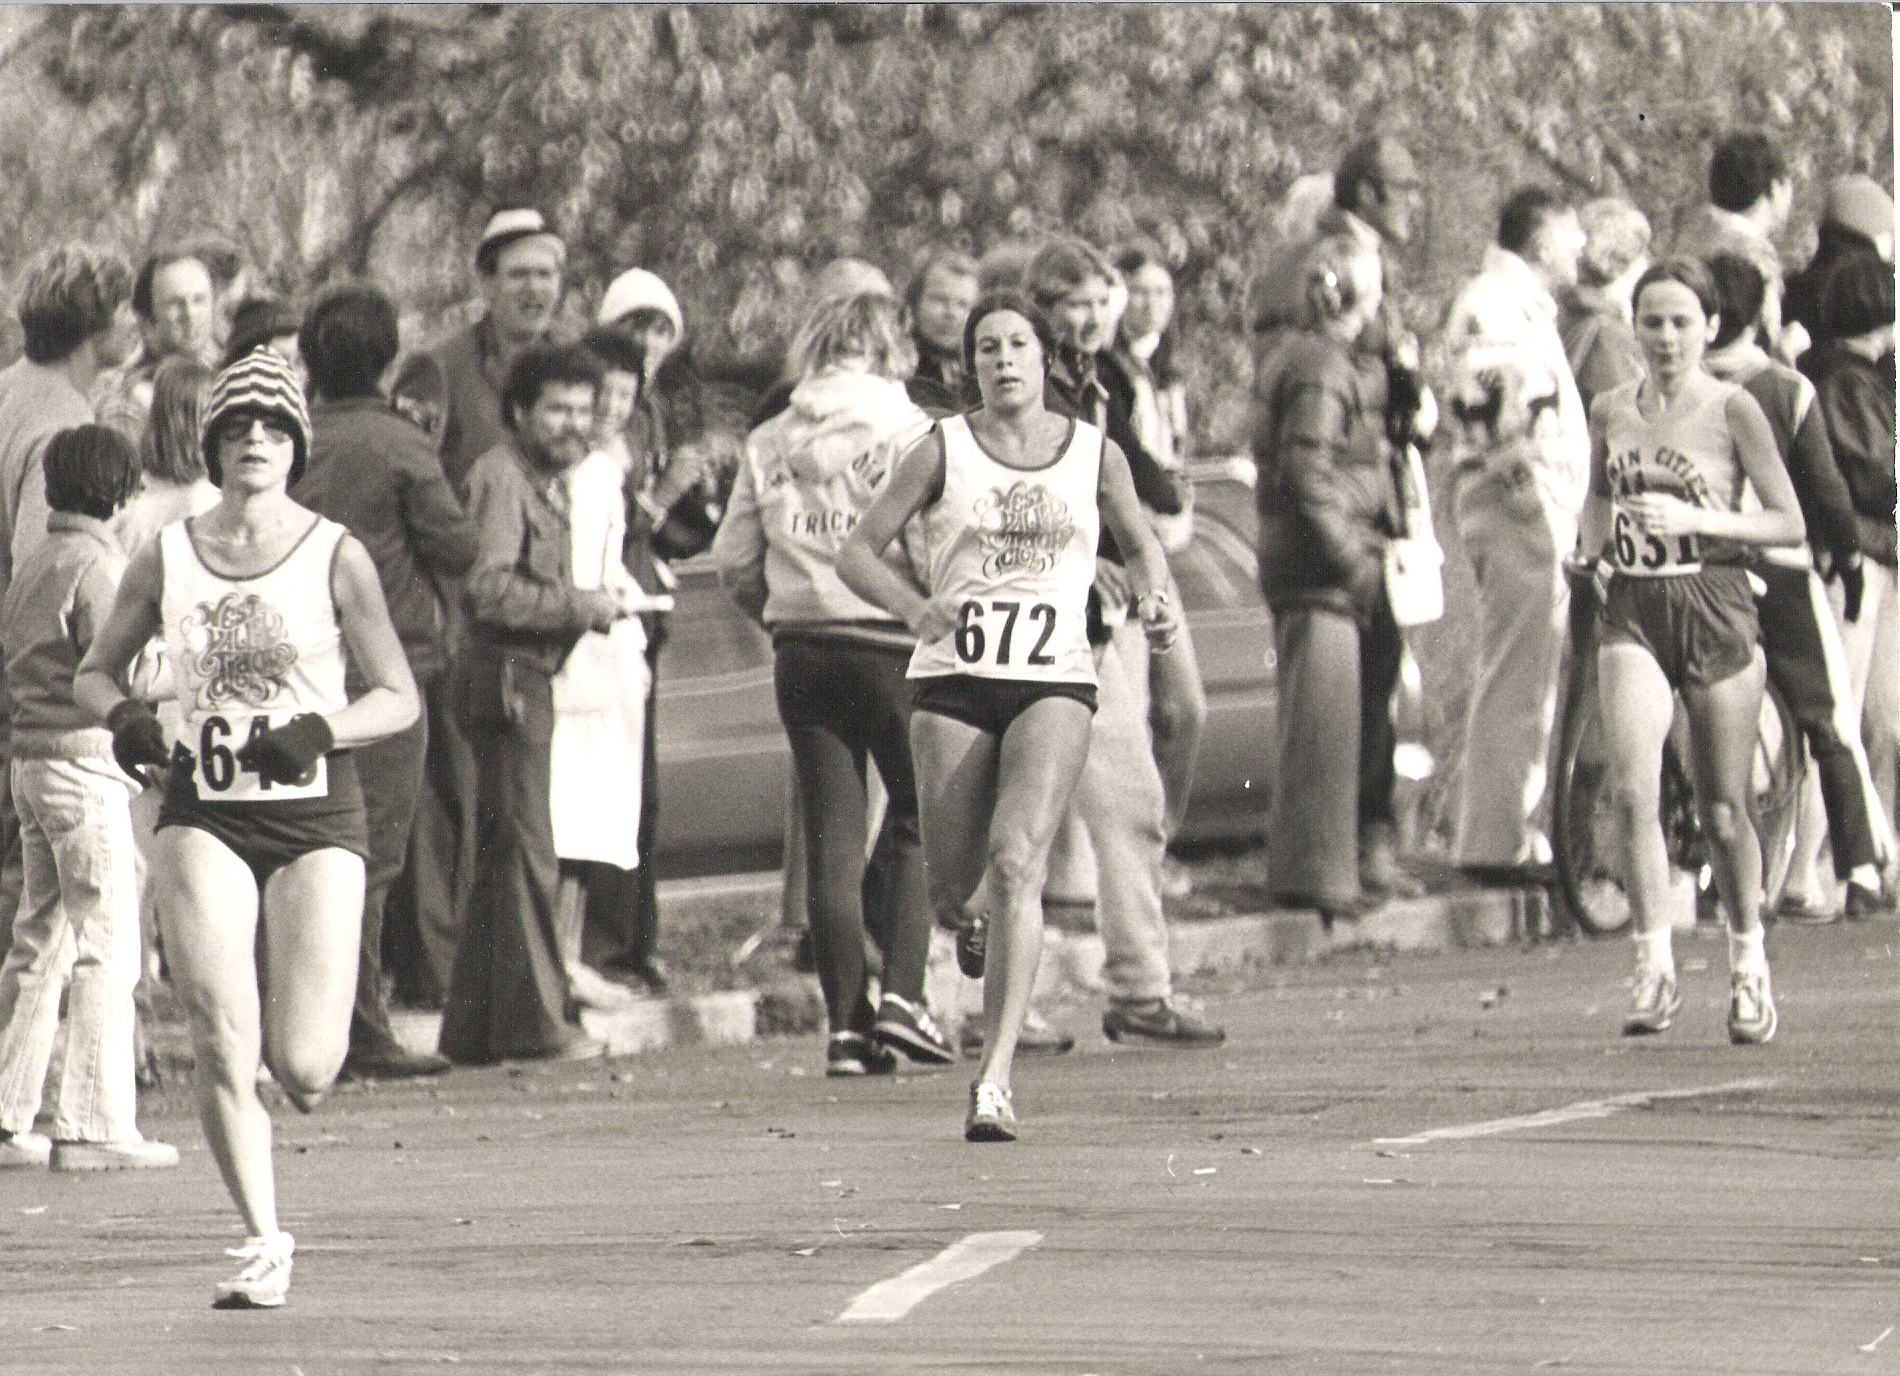 Three runners, including Jan Arenz of Minnesota, in the Women’s National Marathon Championship on October 23, 1977, in Saint Paul. Photo courtesy StarTribune.